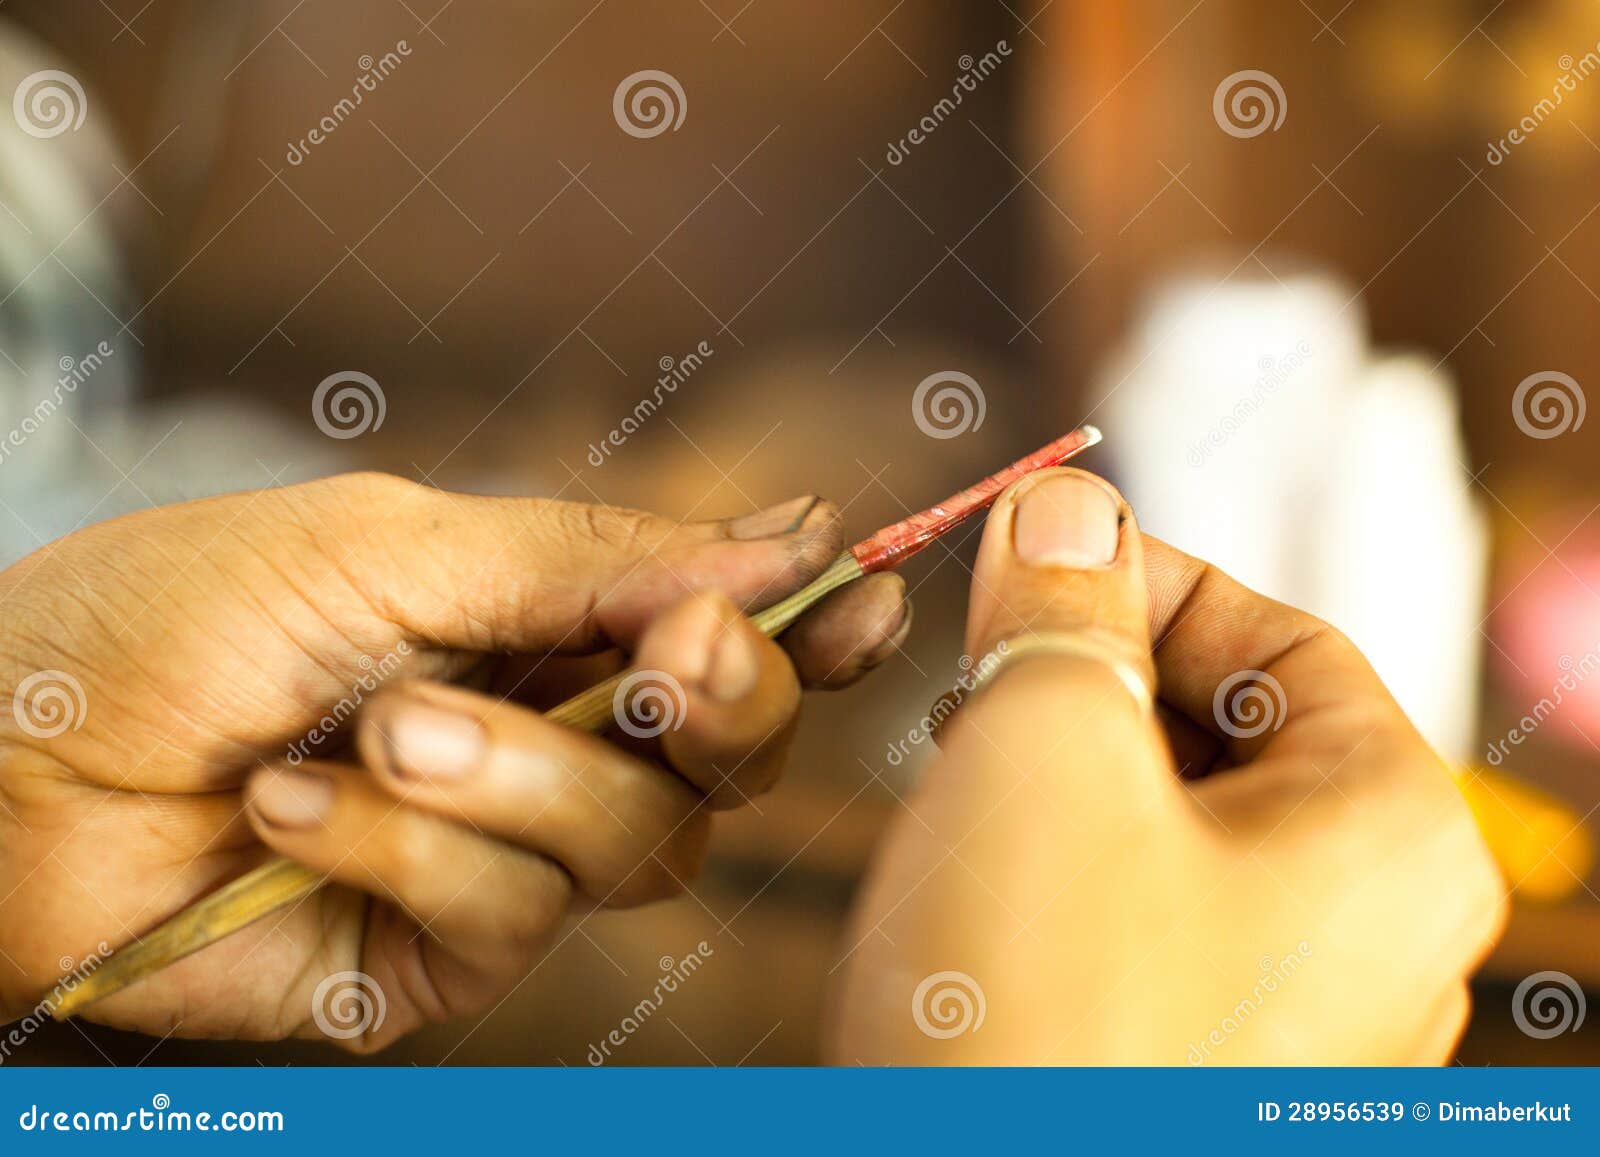 Prepare Tools for Traditional Tattoo Bamboo Editorial Stock Image ...